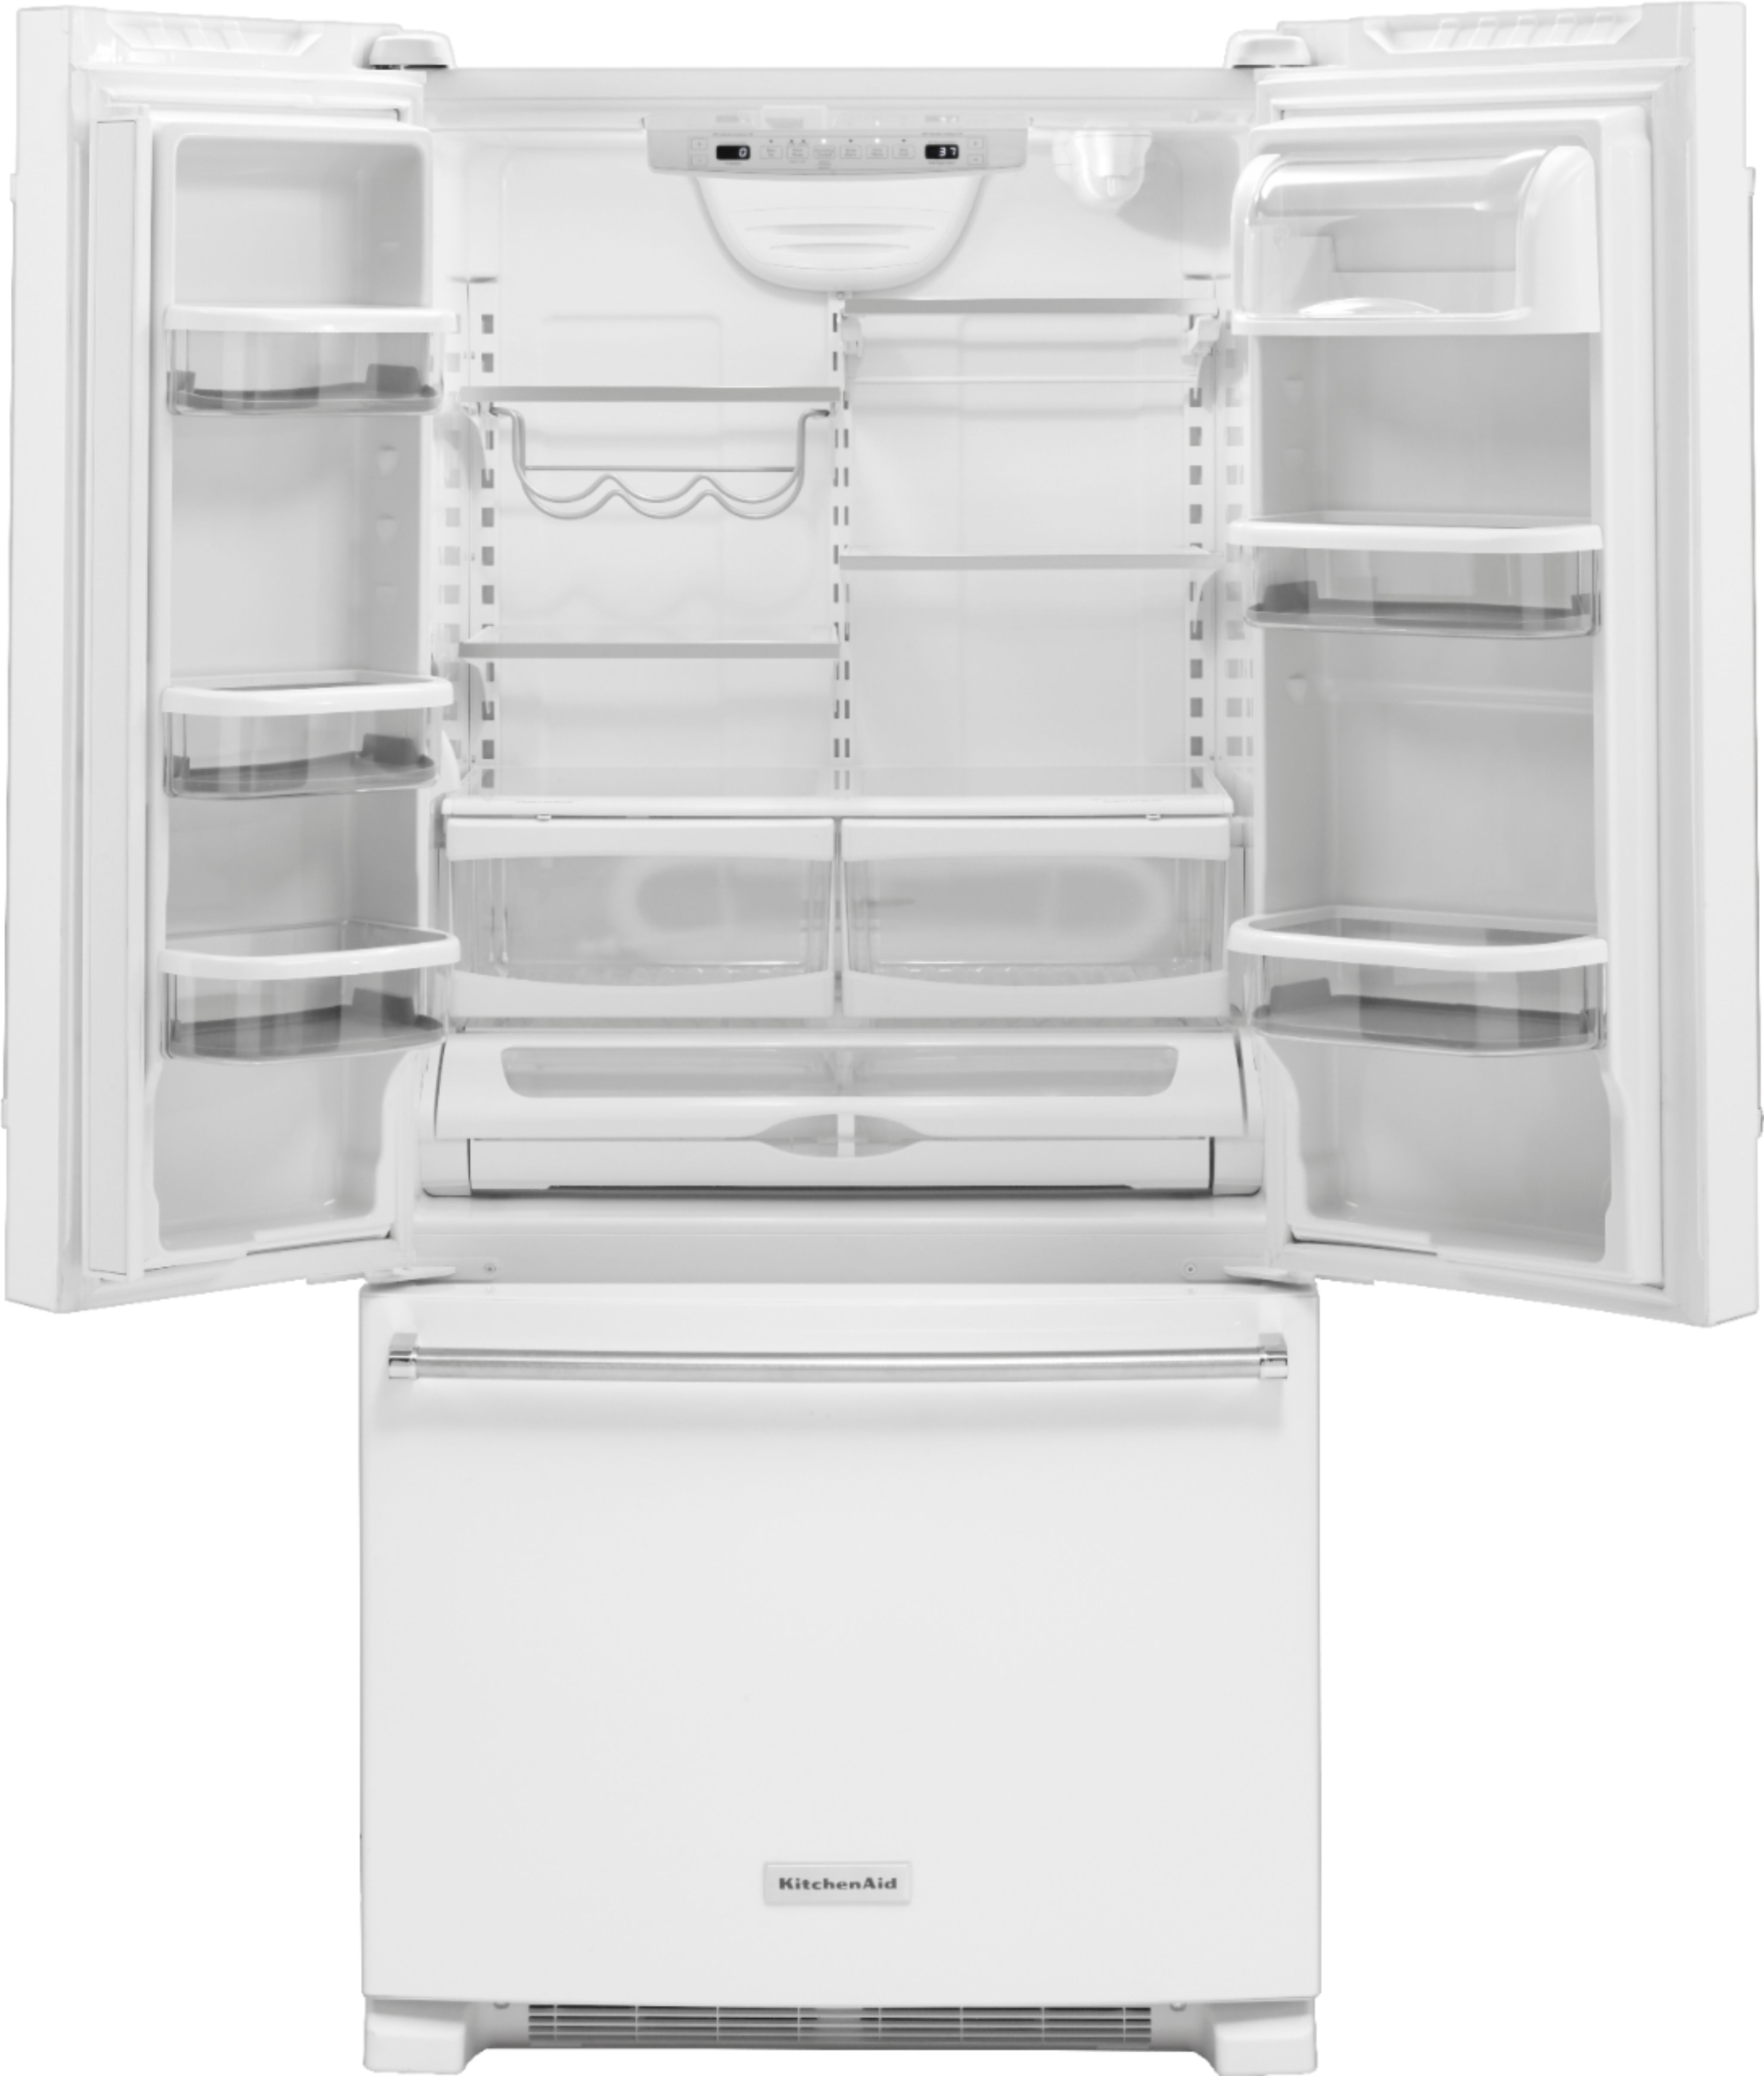 Questions and Answers: KitchenAid 22.1 Cu. Ft. French Door Refrigerator ...